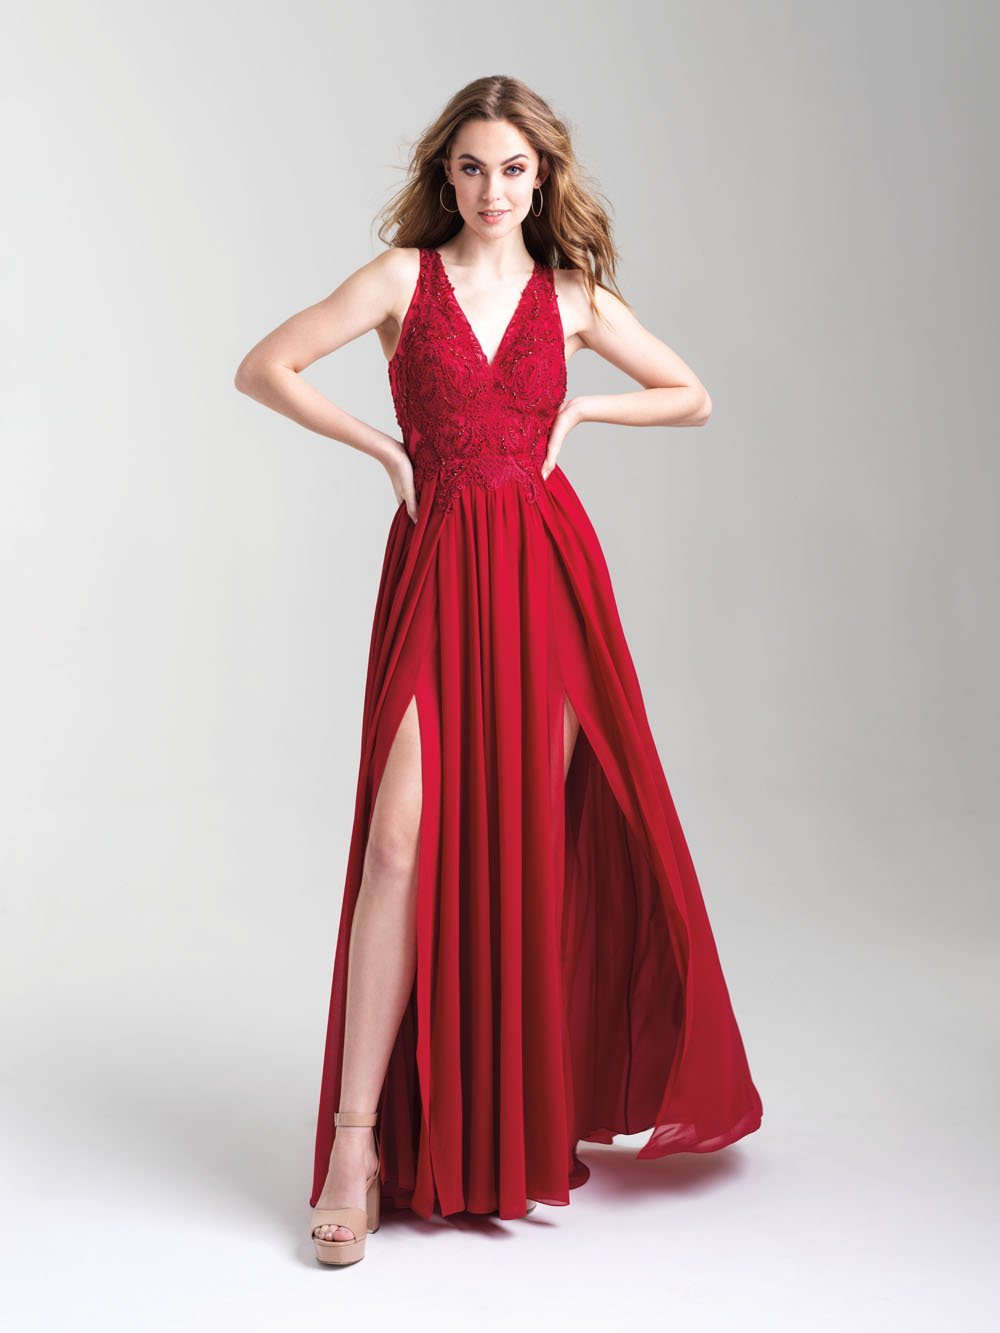 Madison James 20-325 dress images in these colors: Fuchsia, Red, Black, Royal.